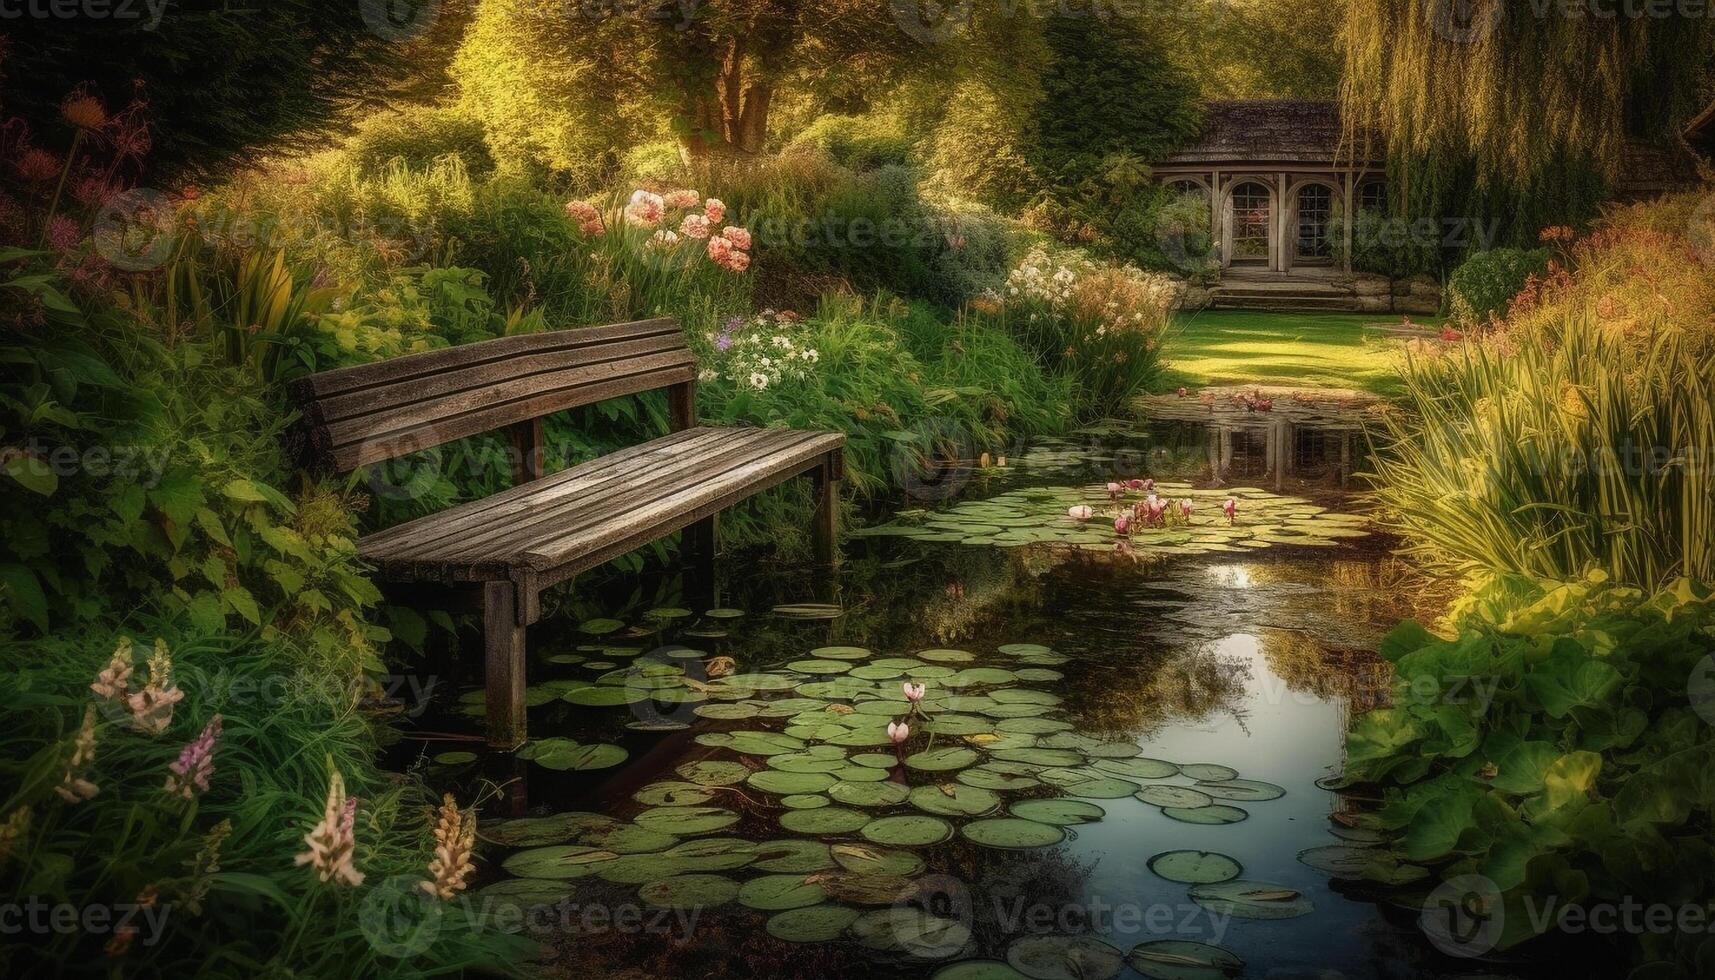 Tranquil scene of a formal garden with a pond and bench generated by AI photo